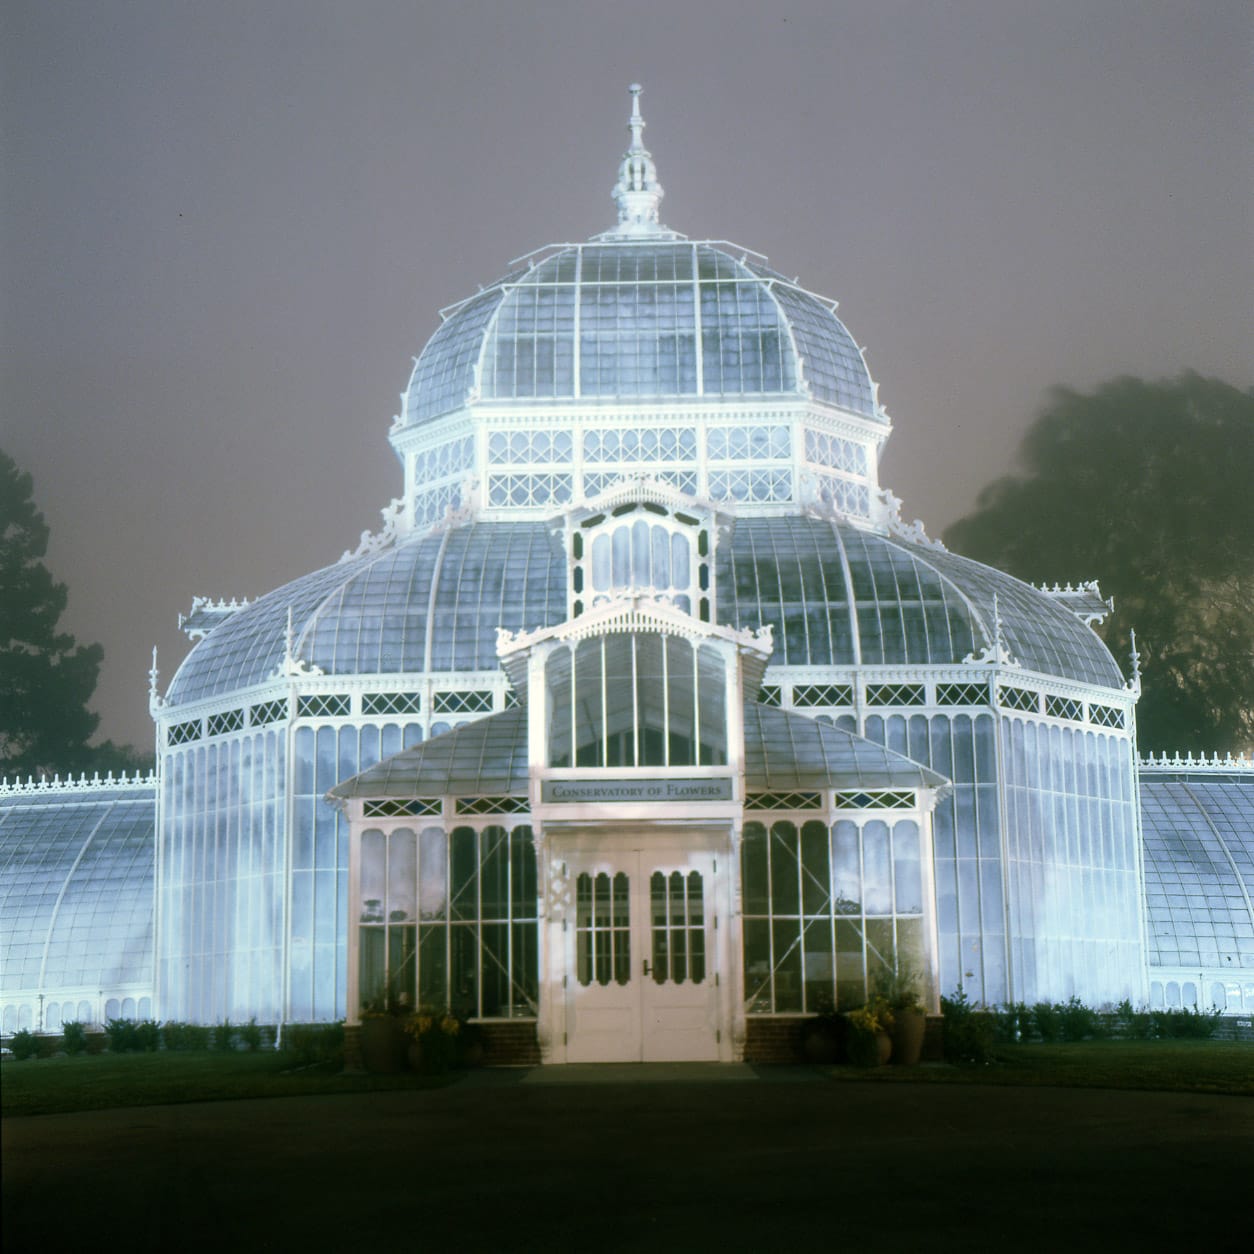 Conservatory-of-Flowers